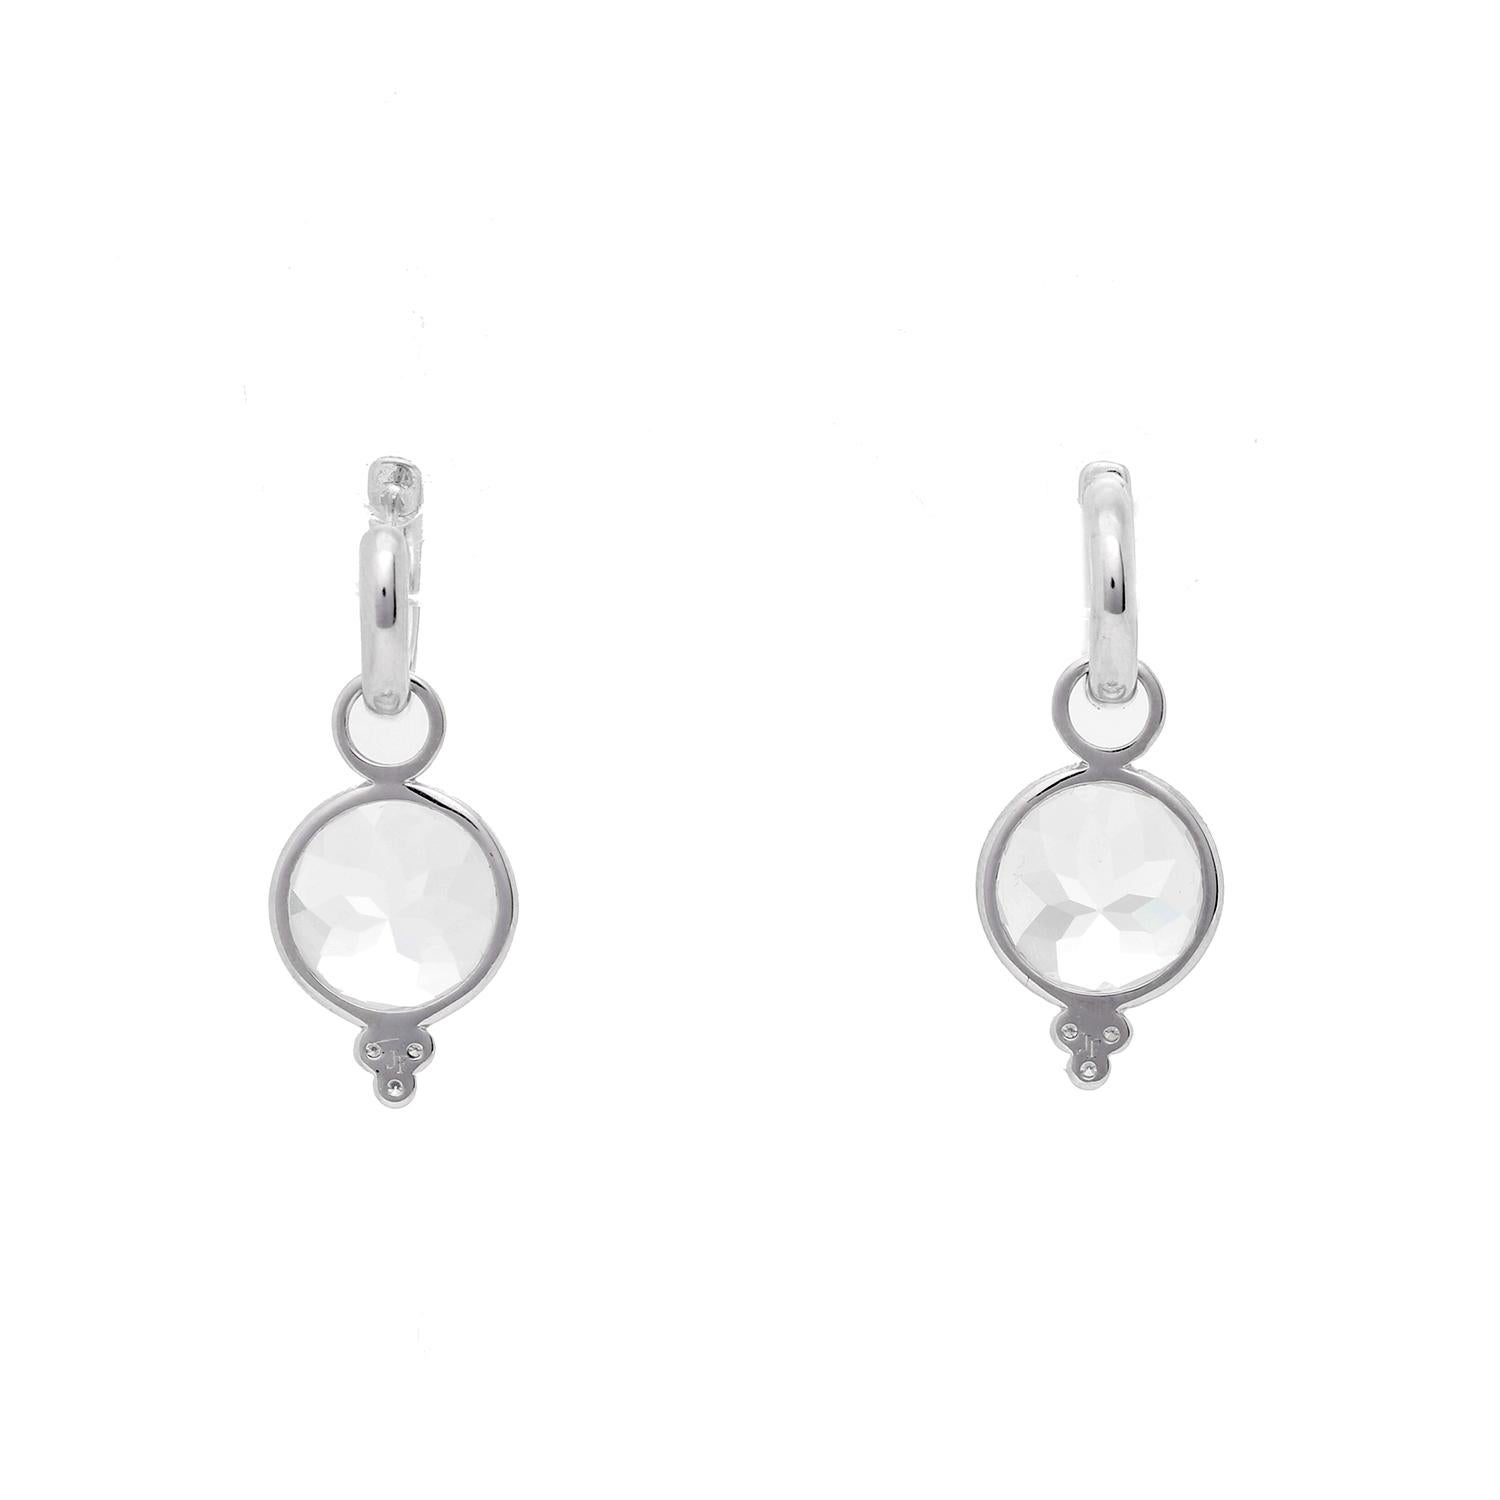 Jude Frances Provence Round White Topaz Earrings - . Unused Diamond huggie hoops with 18K White gold diamonds .03ct weight. Charm features round faceted white Topaz set with a diamond trio accent. Truly stunning.